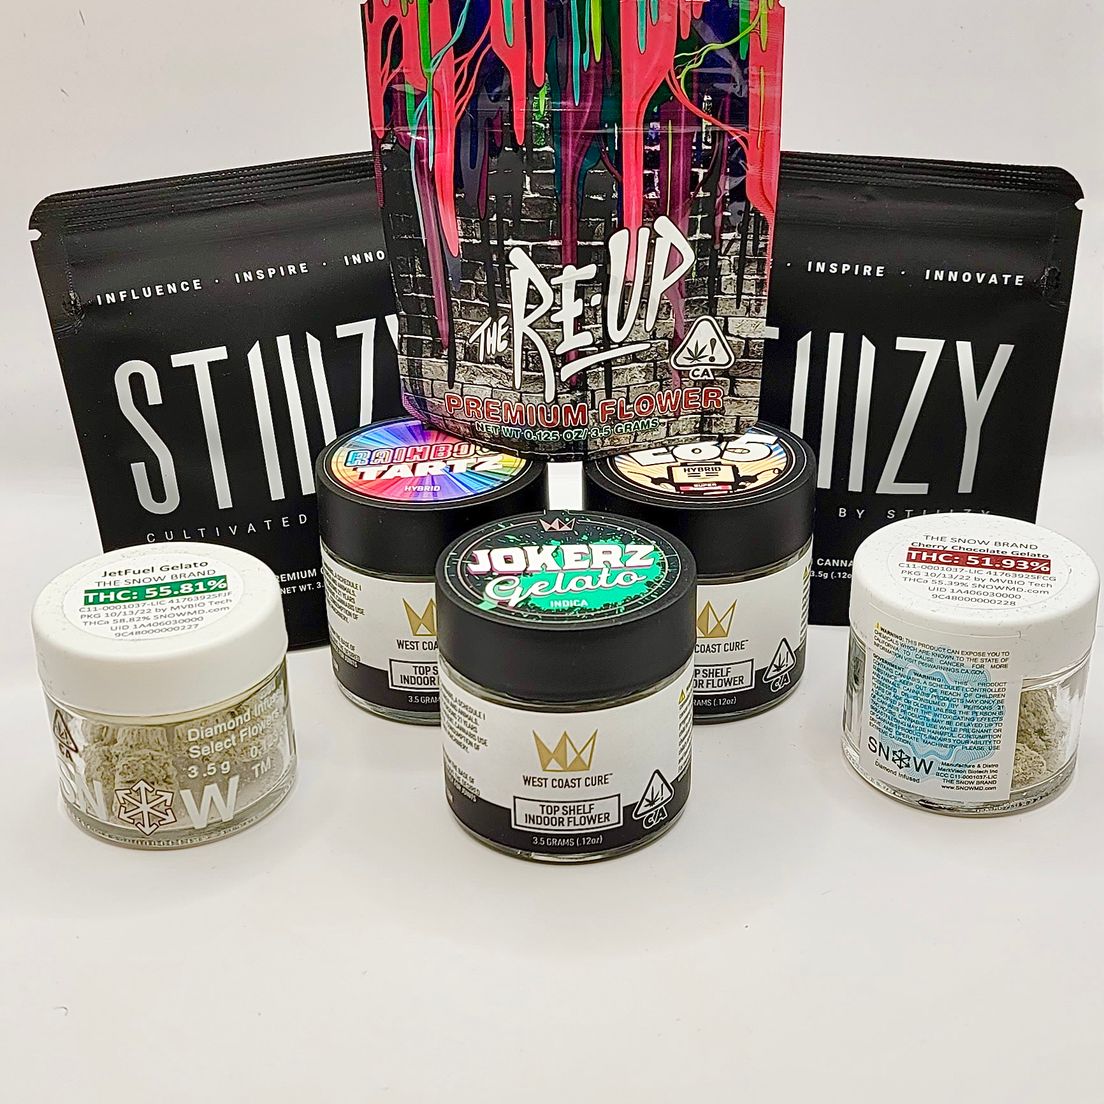 *Deal! $89 Mix n' Match Any (2) $65 1/8s by Stiiizy, West Coast Cure, Snow, The Re-Up & RIPP